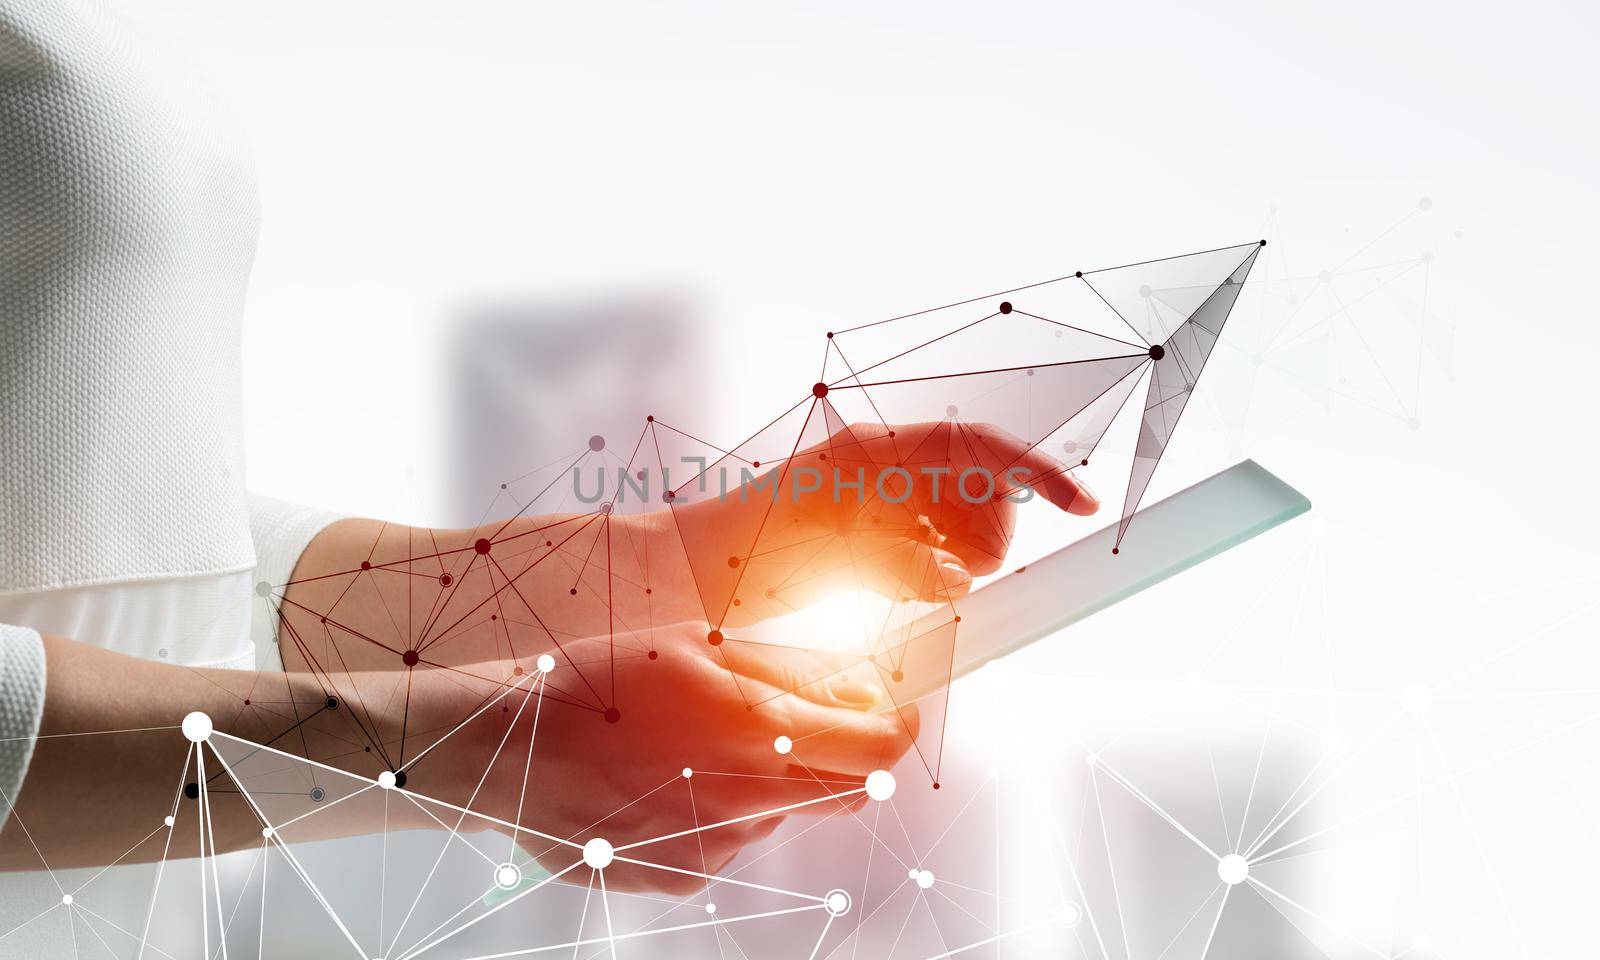 Businesswoman works with futuristic interface. Virtual geometric graphics with plexus effect and digital hologram. Double exposure concept of internet network communication. Cybernetic workspace